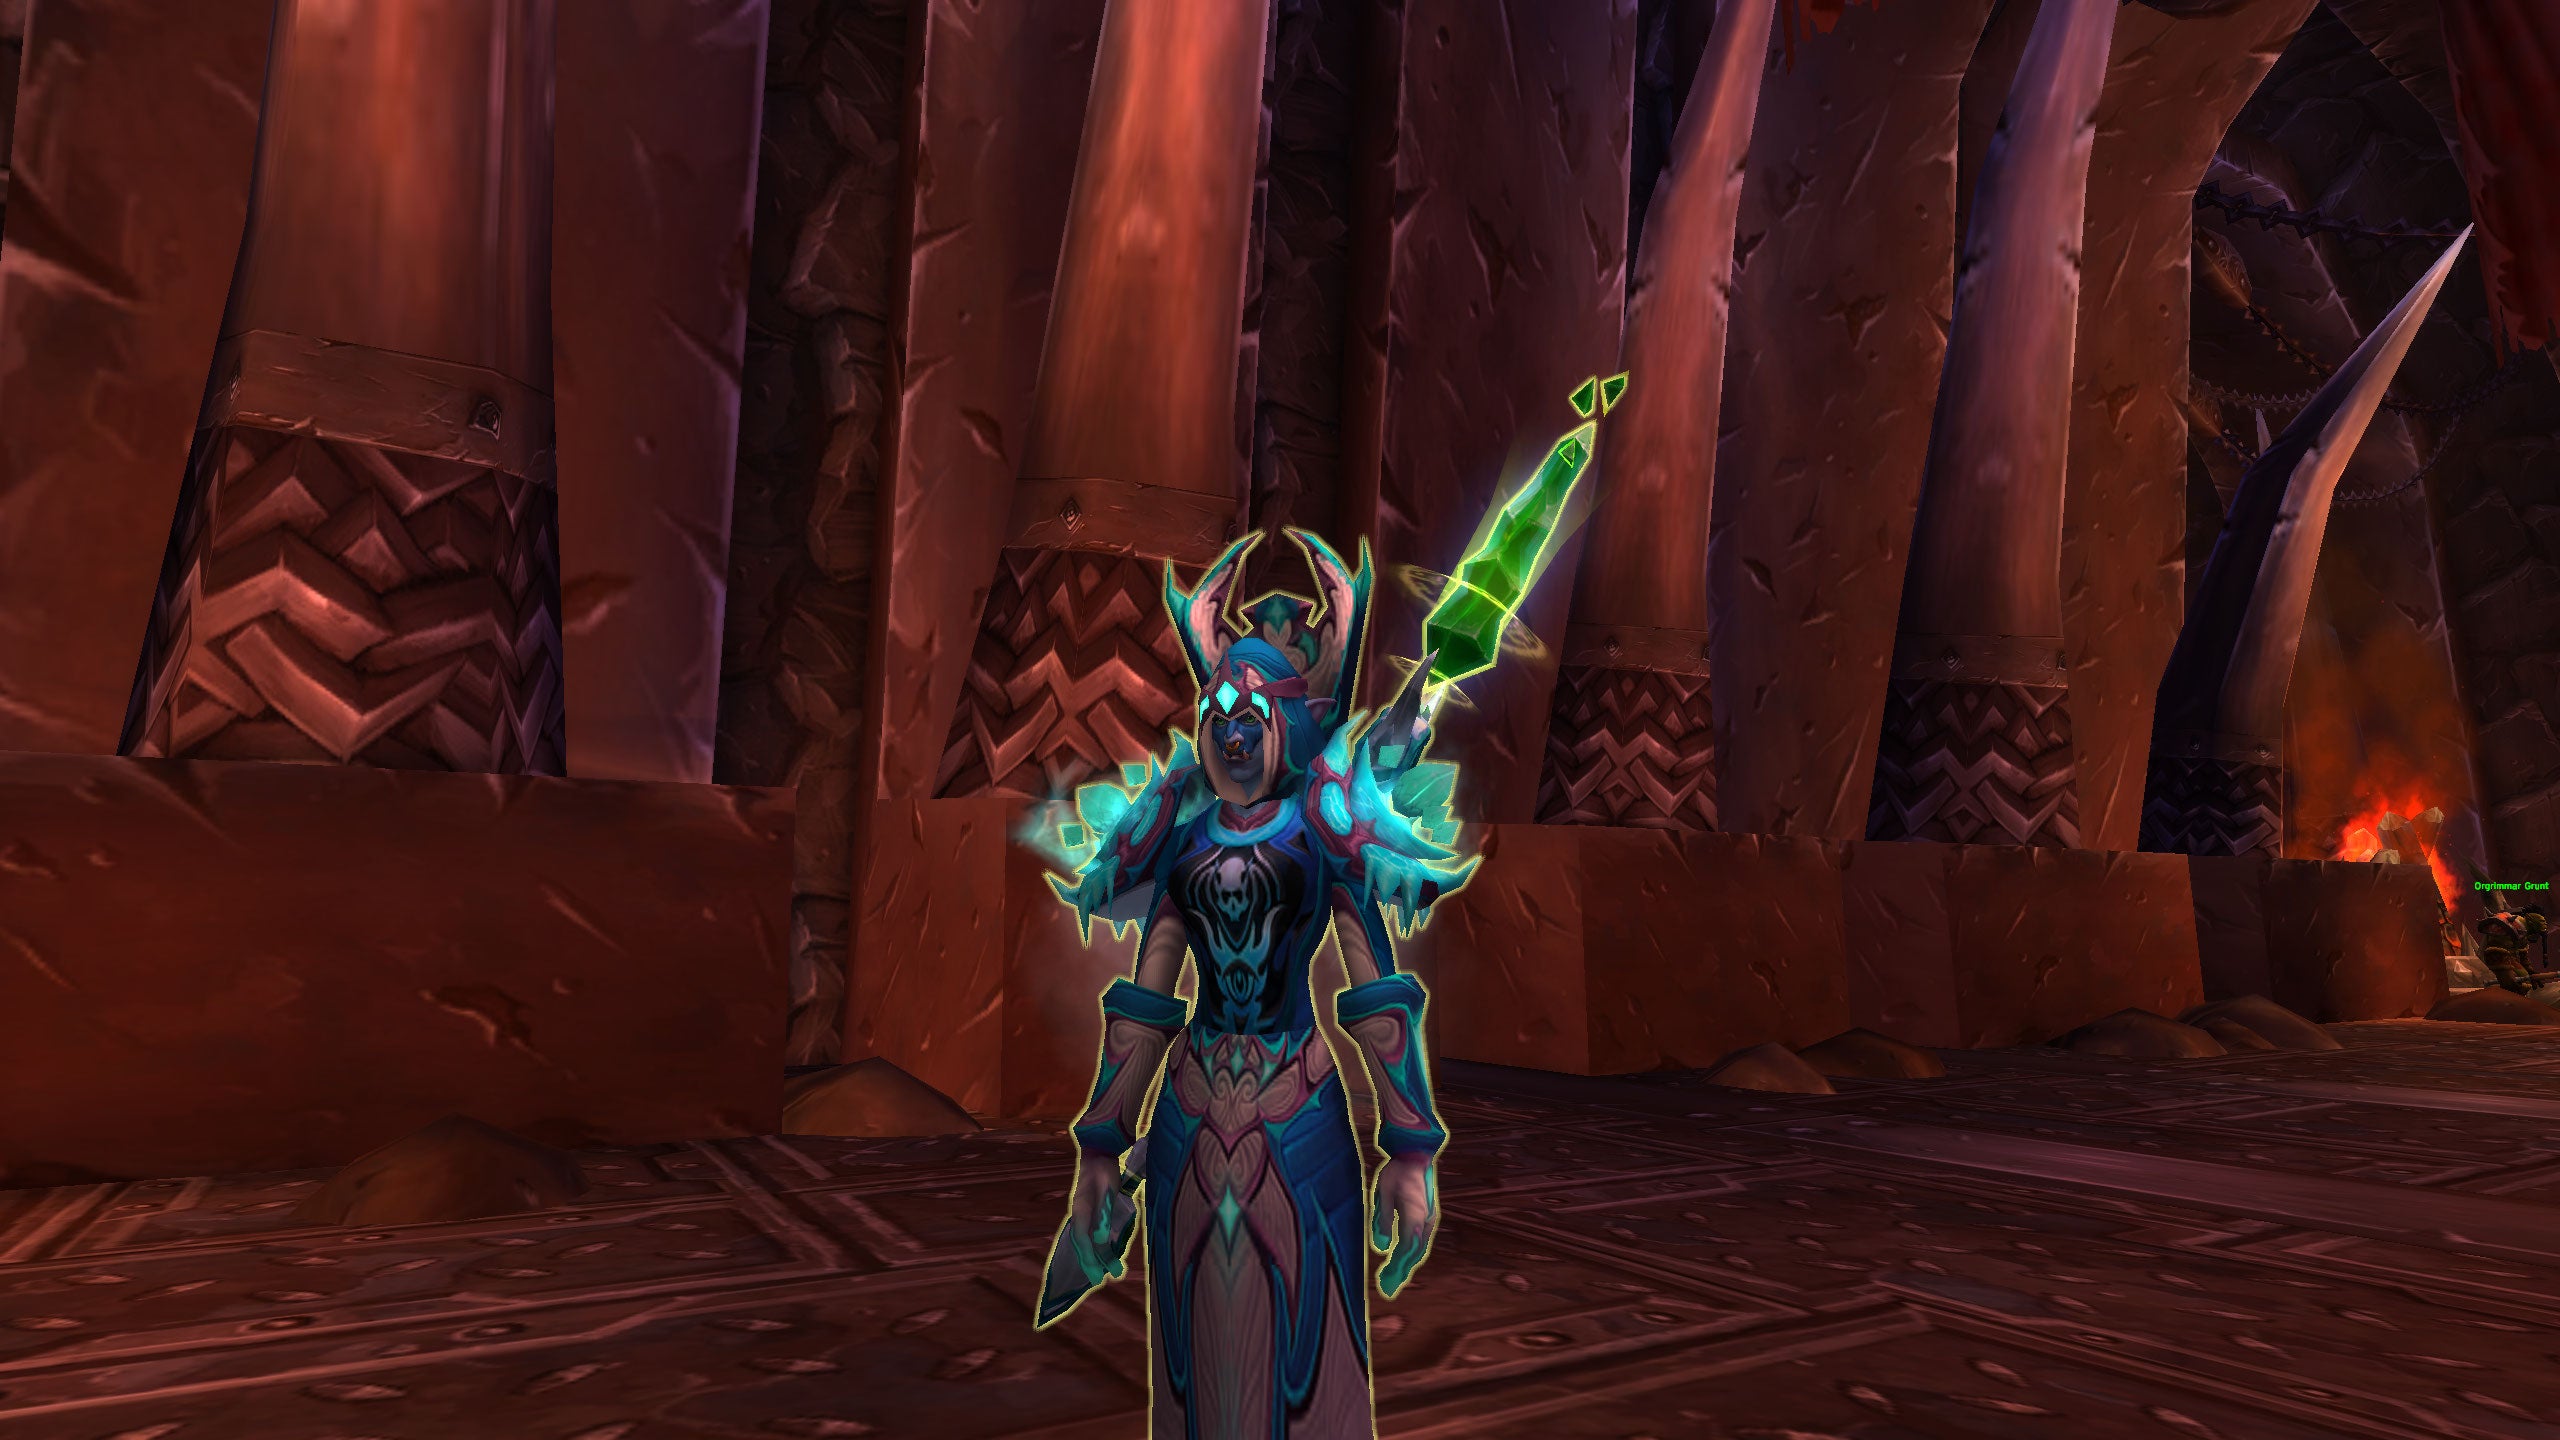 Corrupted Ashbringer - Scarab Lord - Atiesh - 8x Realm Firsts - Naxx40 items - Undead Slaying - 8x CM - 6x T3 - Rank 1 - Elite Sets